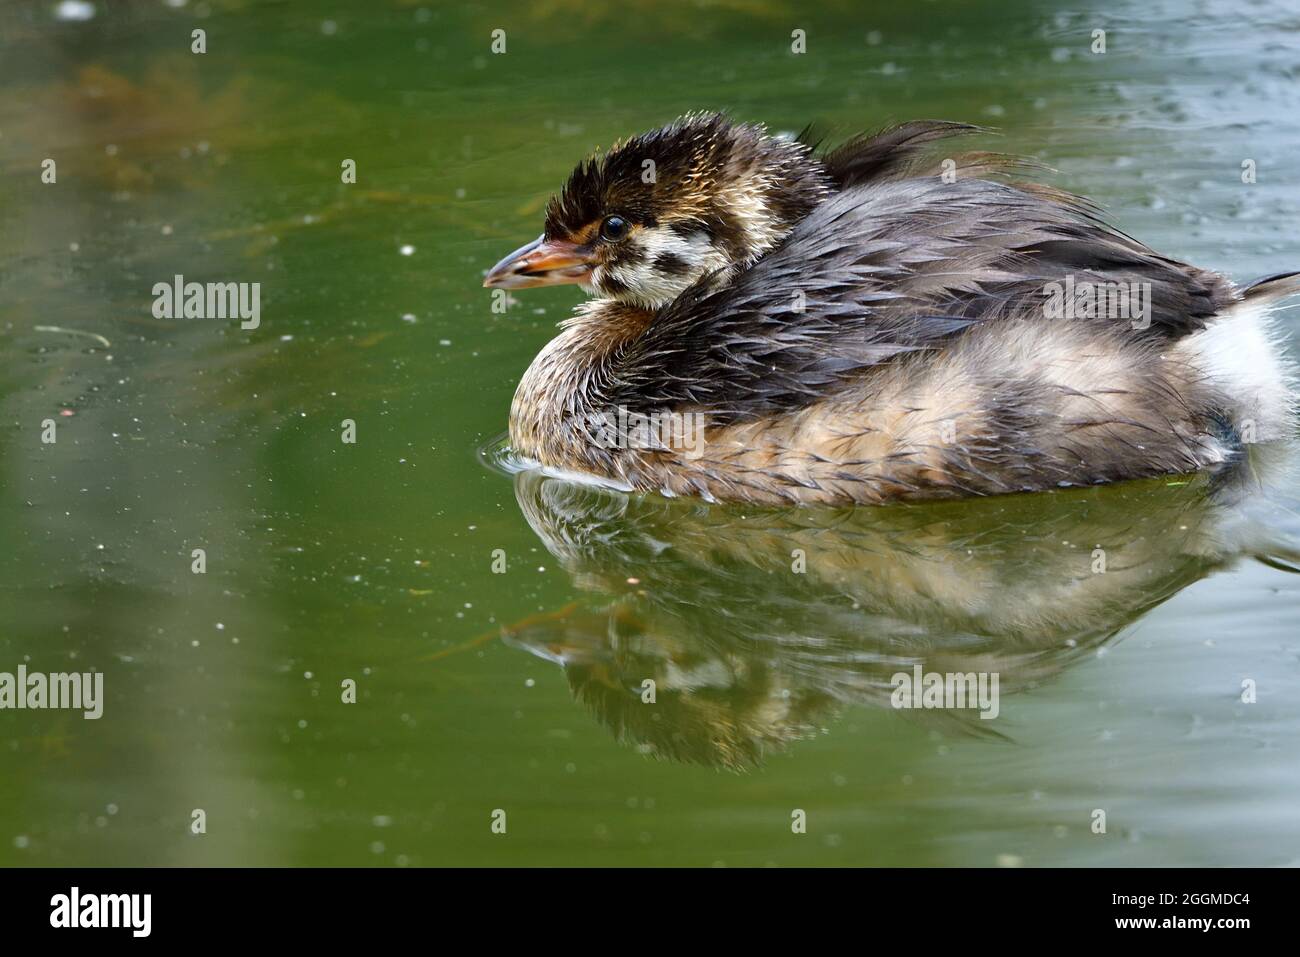 A pied-billed grebe chick  ' Podilymbus podiceps', floating on the still waters of a remote beaver pond in rural Alberta Canada. Stock Photo